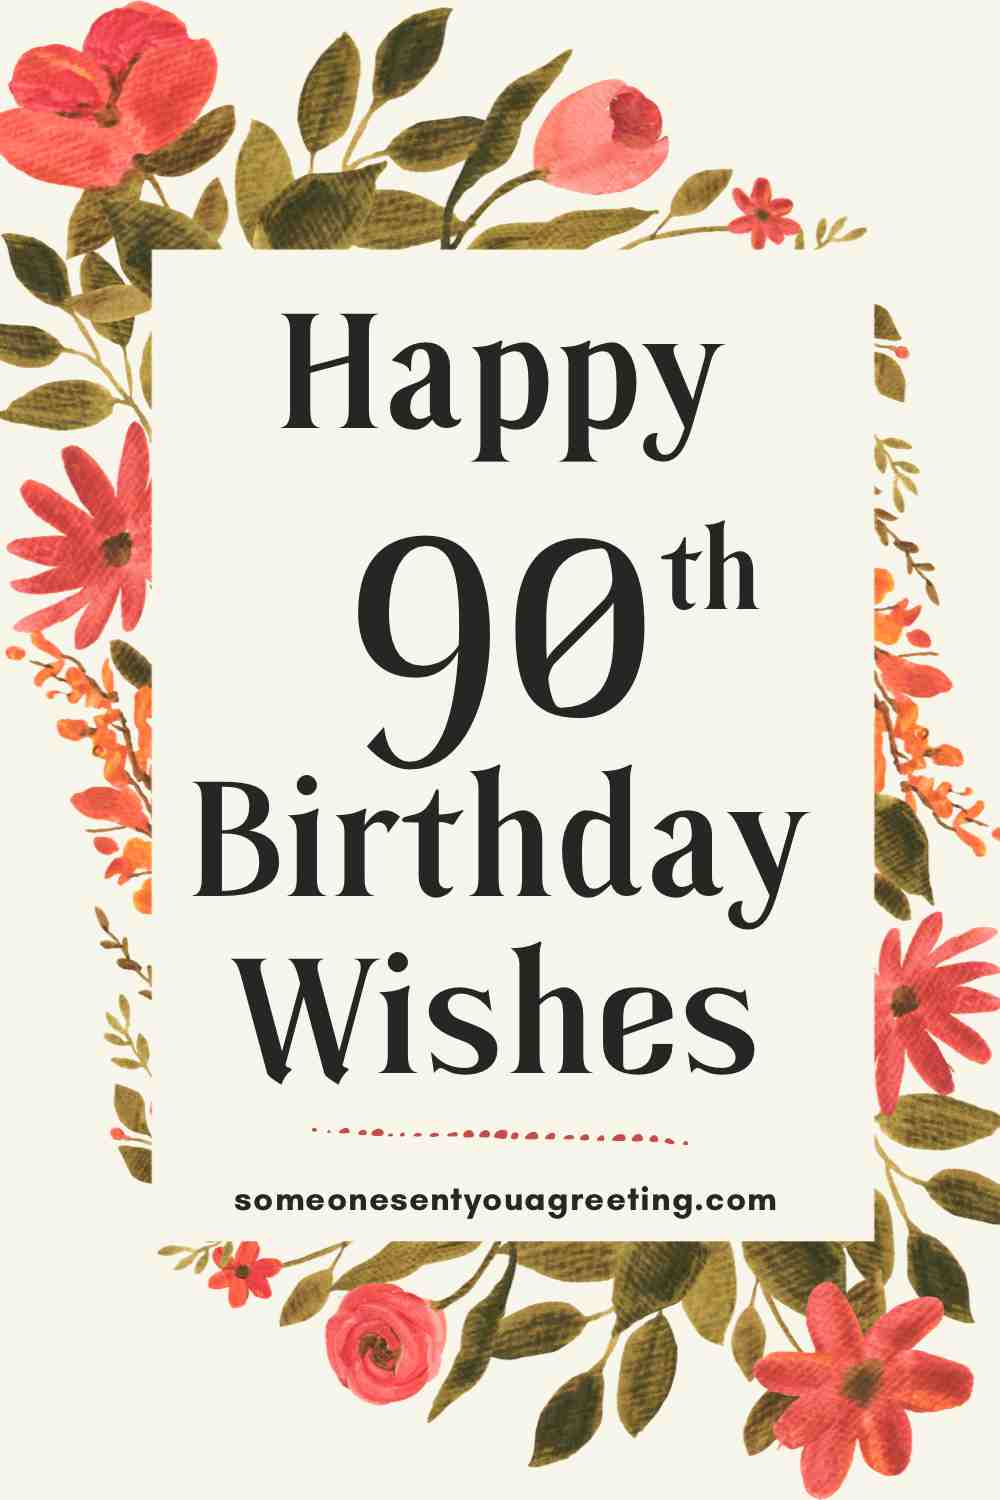 Happy 90th Birthday: 57 Wishes, Messages & Poems